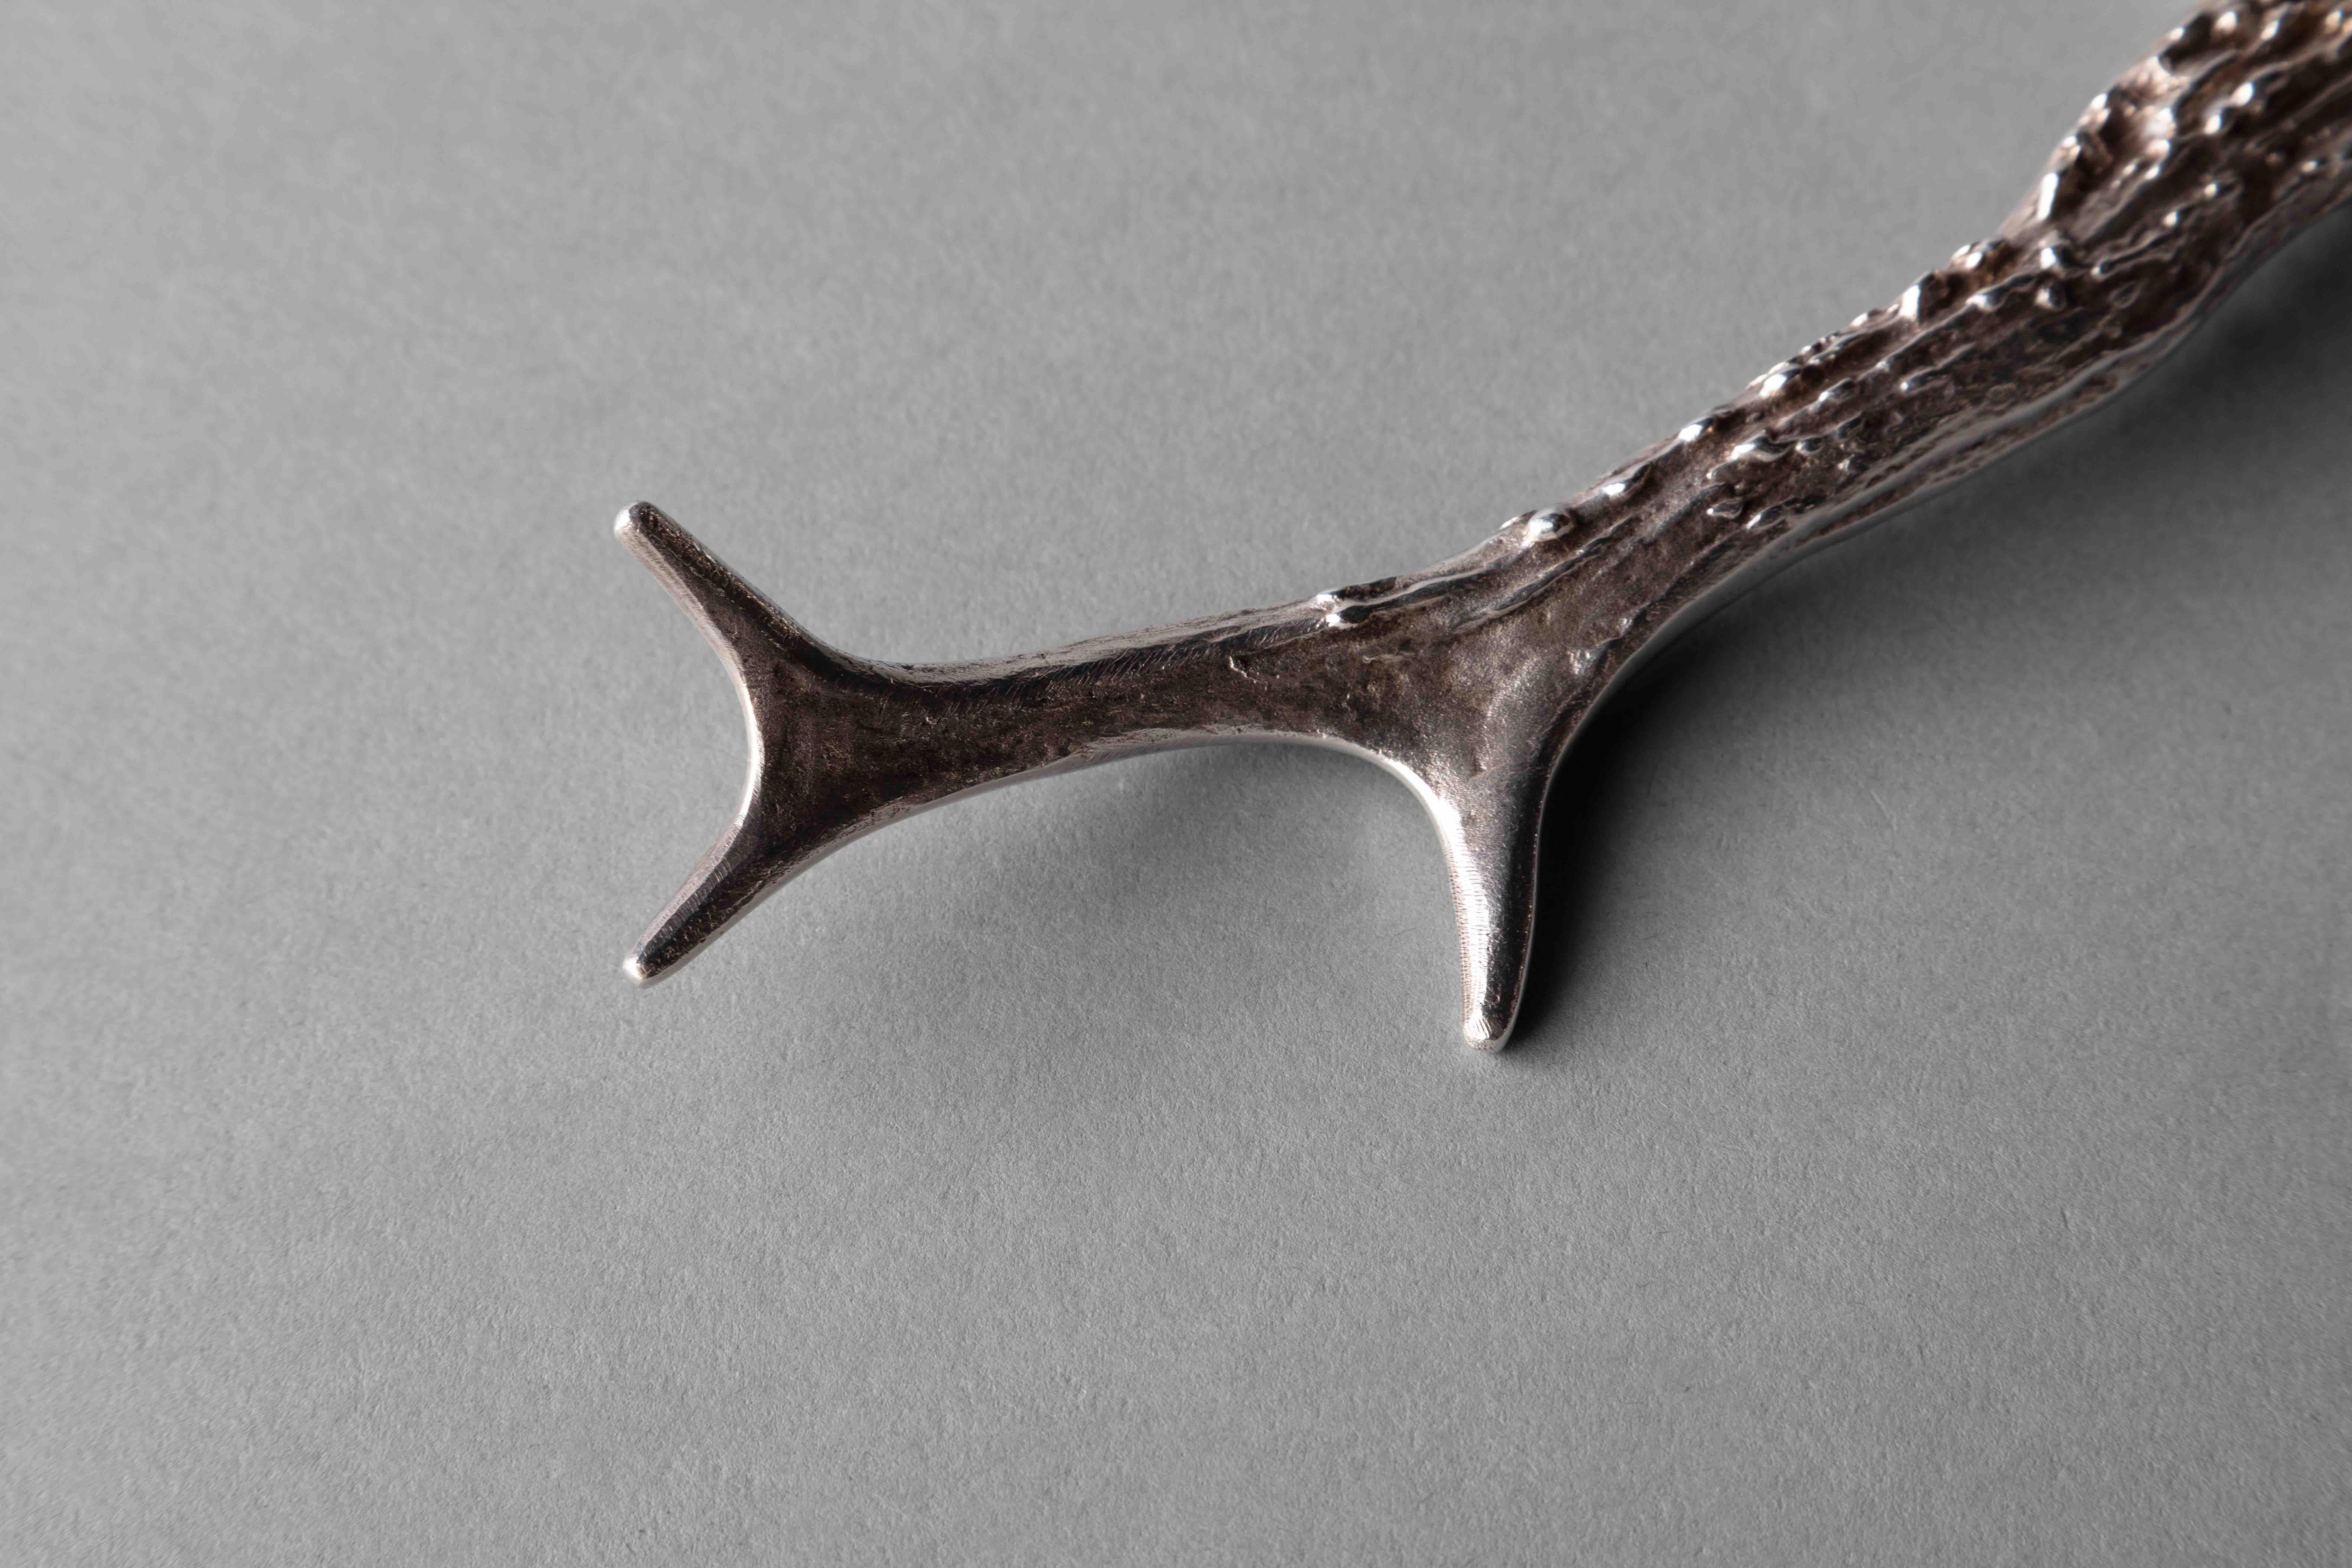 Silvered magnifying glass with handle mimicking deer antlers.